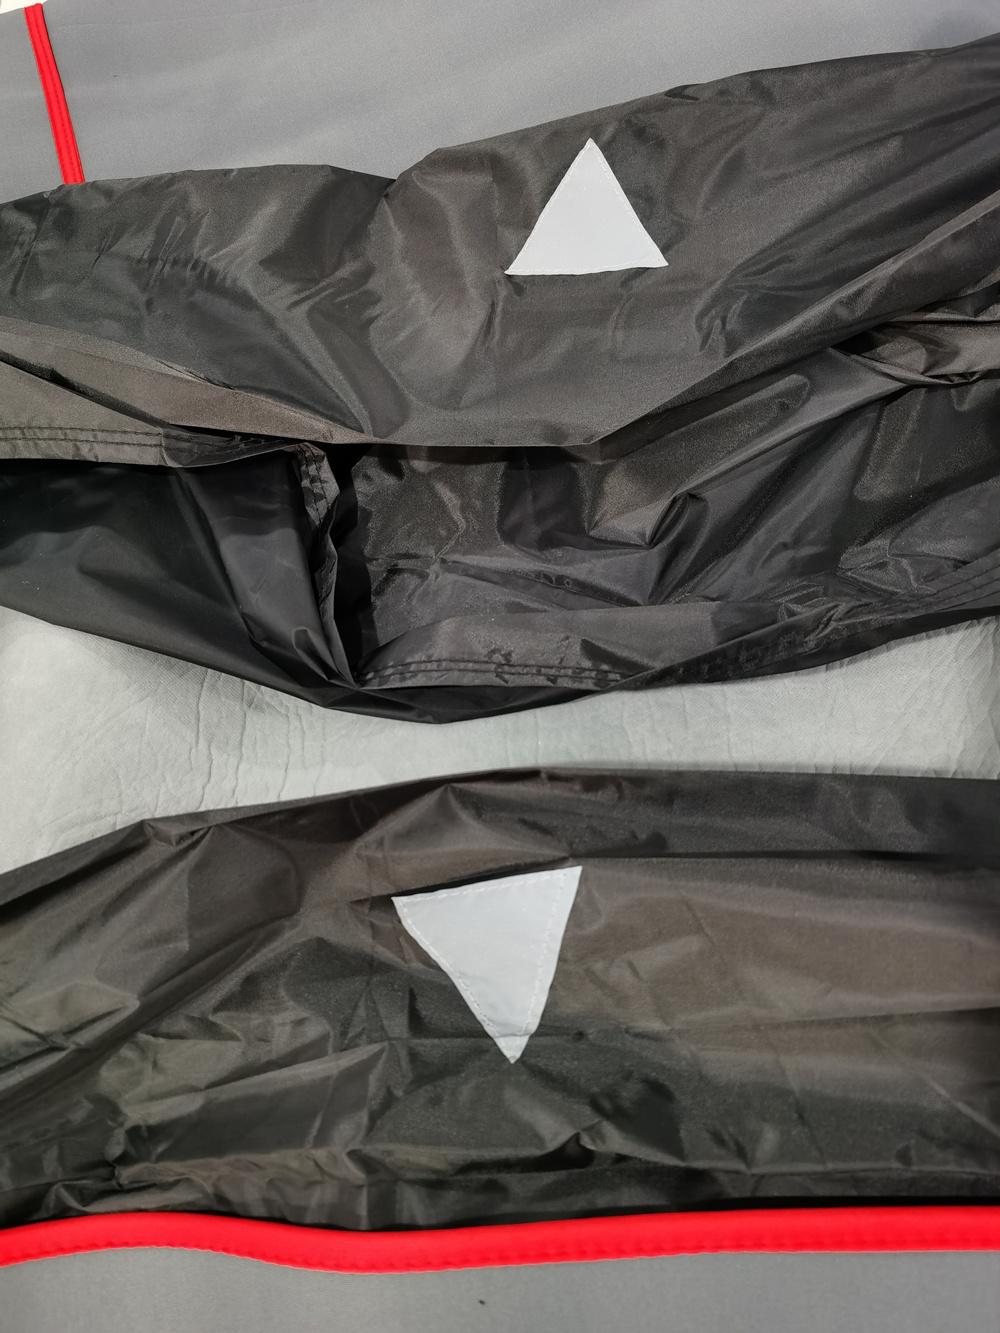 4 Layers Outdoor Car Covers for Automobiles Hail Snow Wind Protection Universal Full Car Cover EVA+Non-Woven Fabric Hail Protection